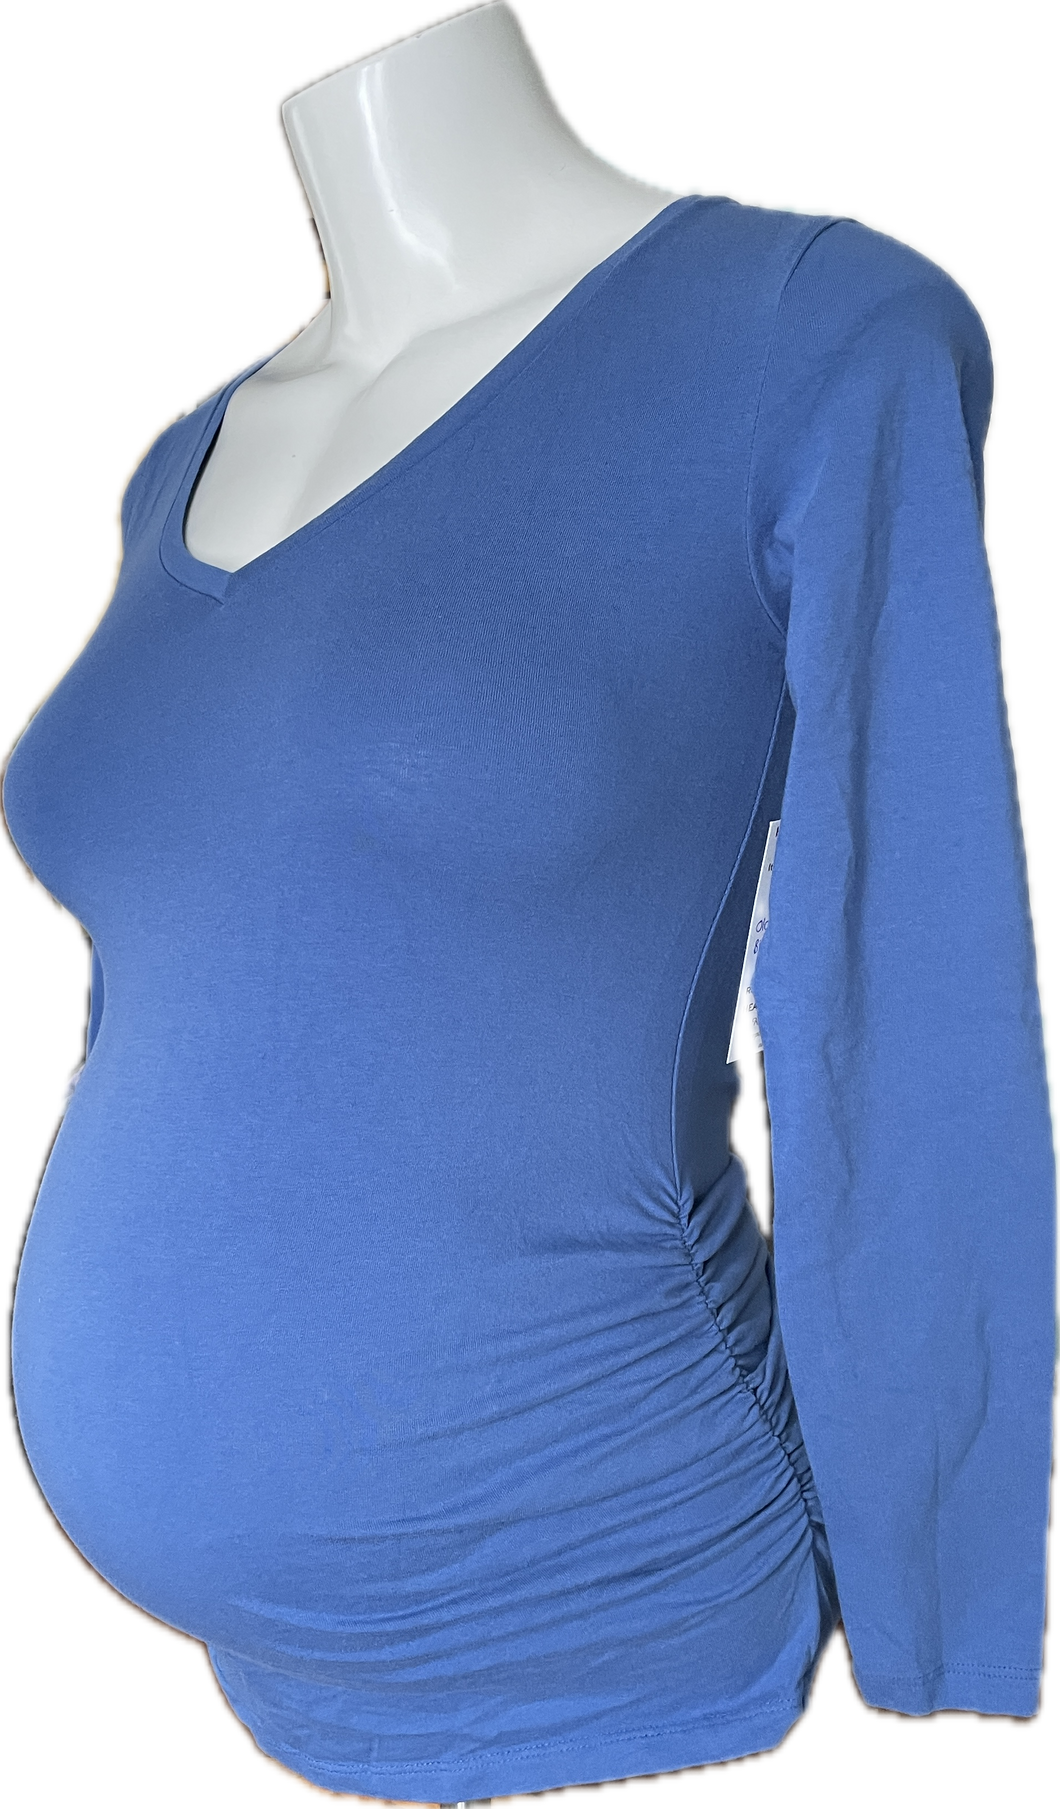 XS Old Navy Maternity Long Sleeve top in Blue